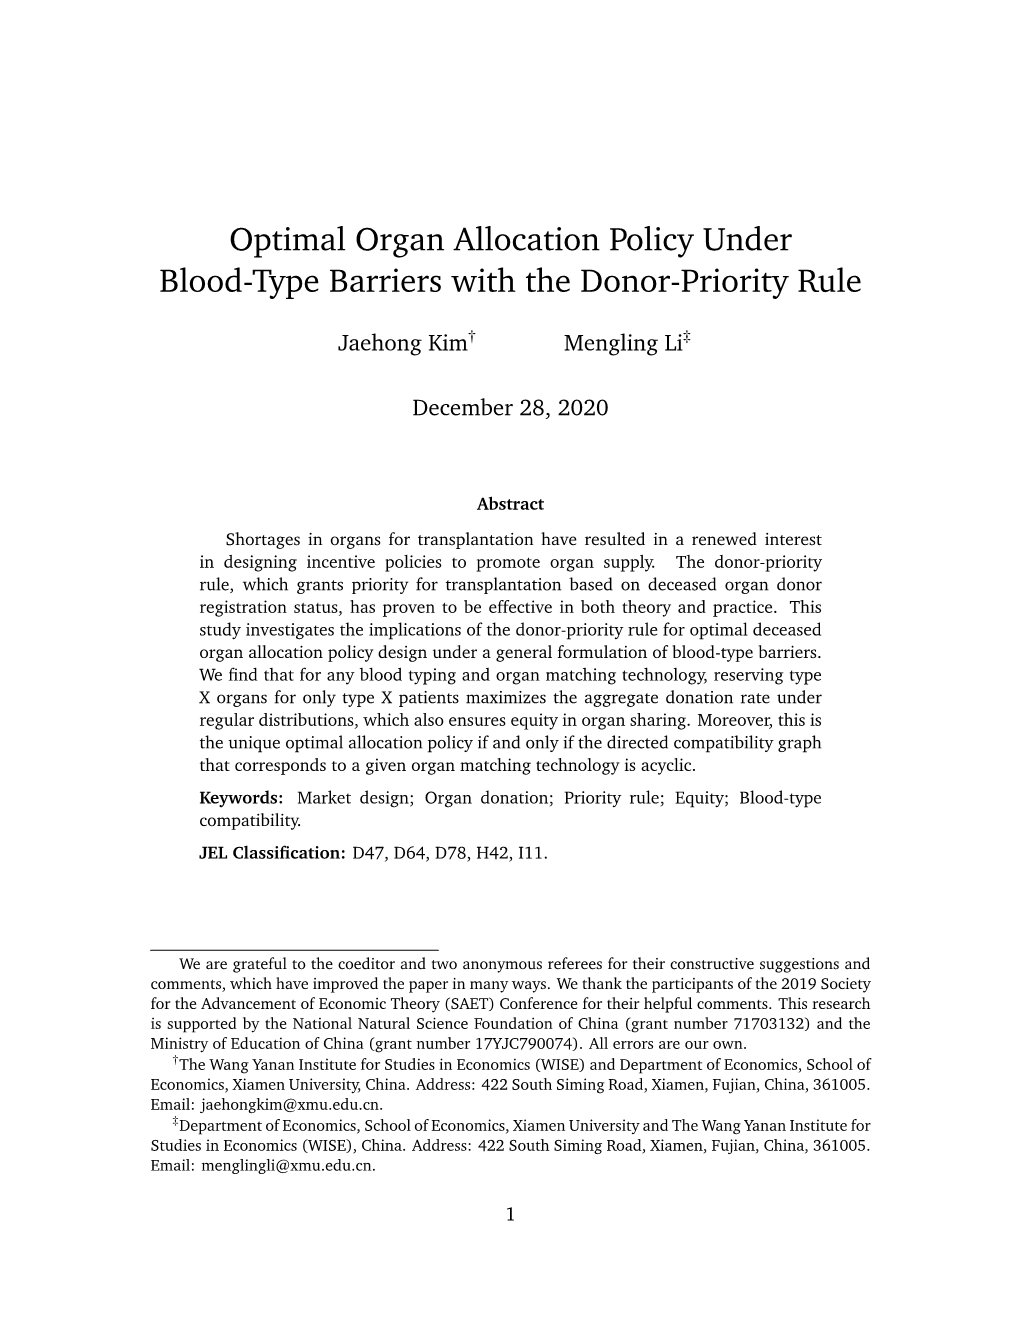 Optimal Organ Allocation Policy Under Blood-Type Barriers with the Donor-Priority Rule